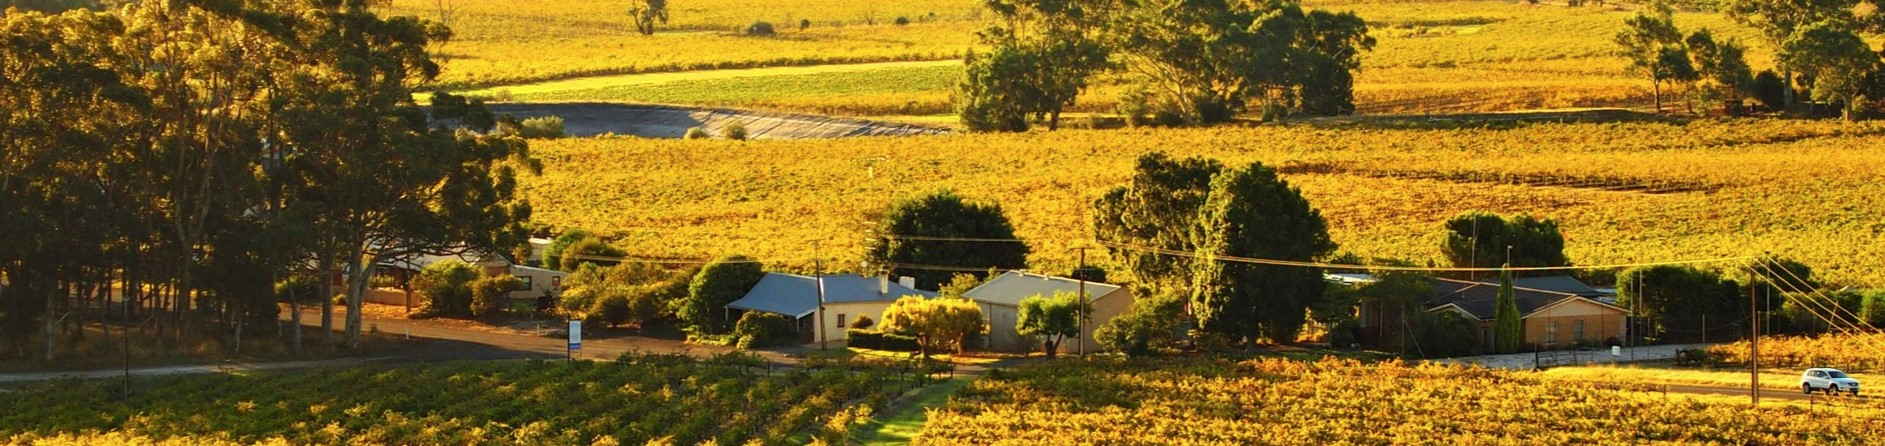 How to Visit the Barossa Valley During Covid-19